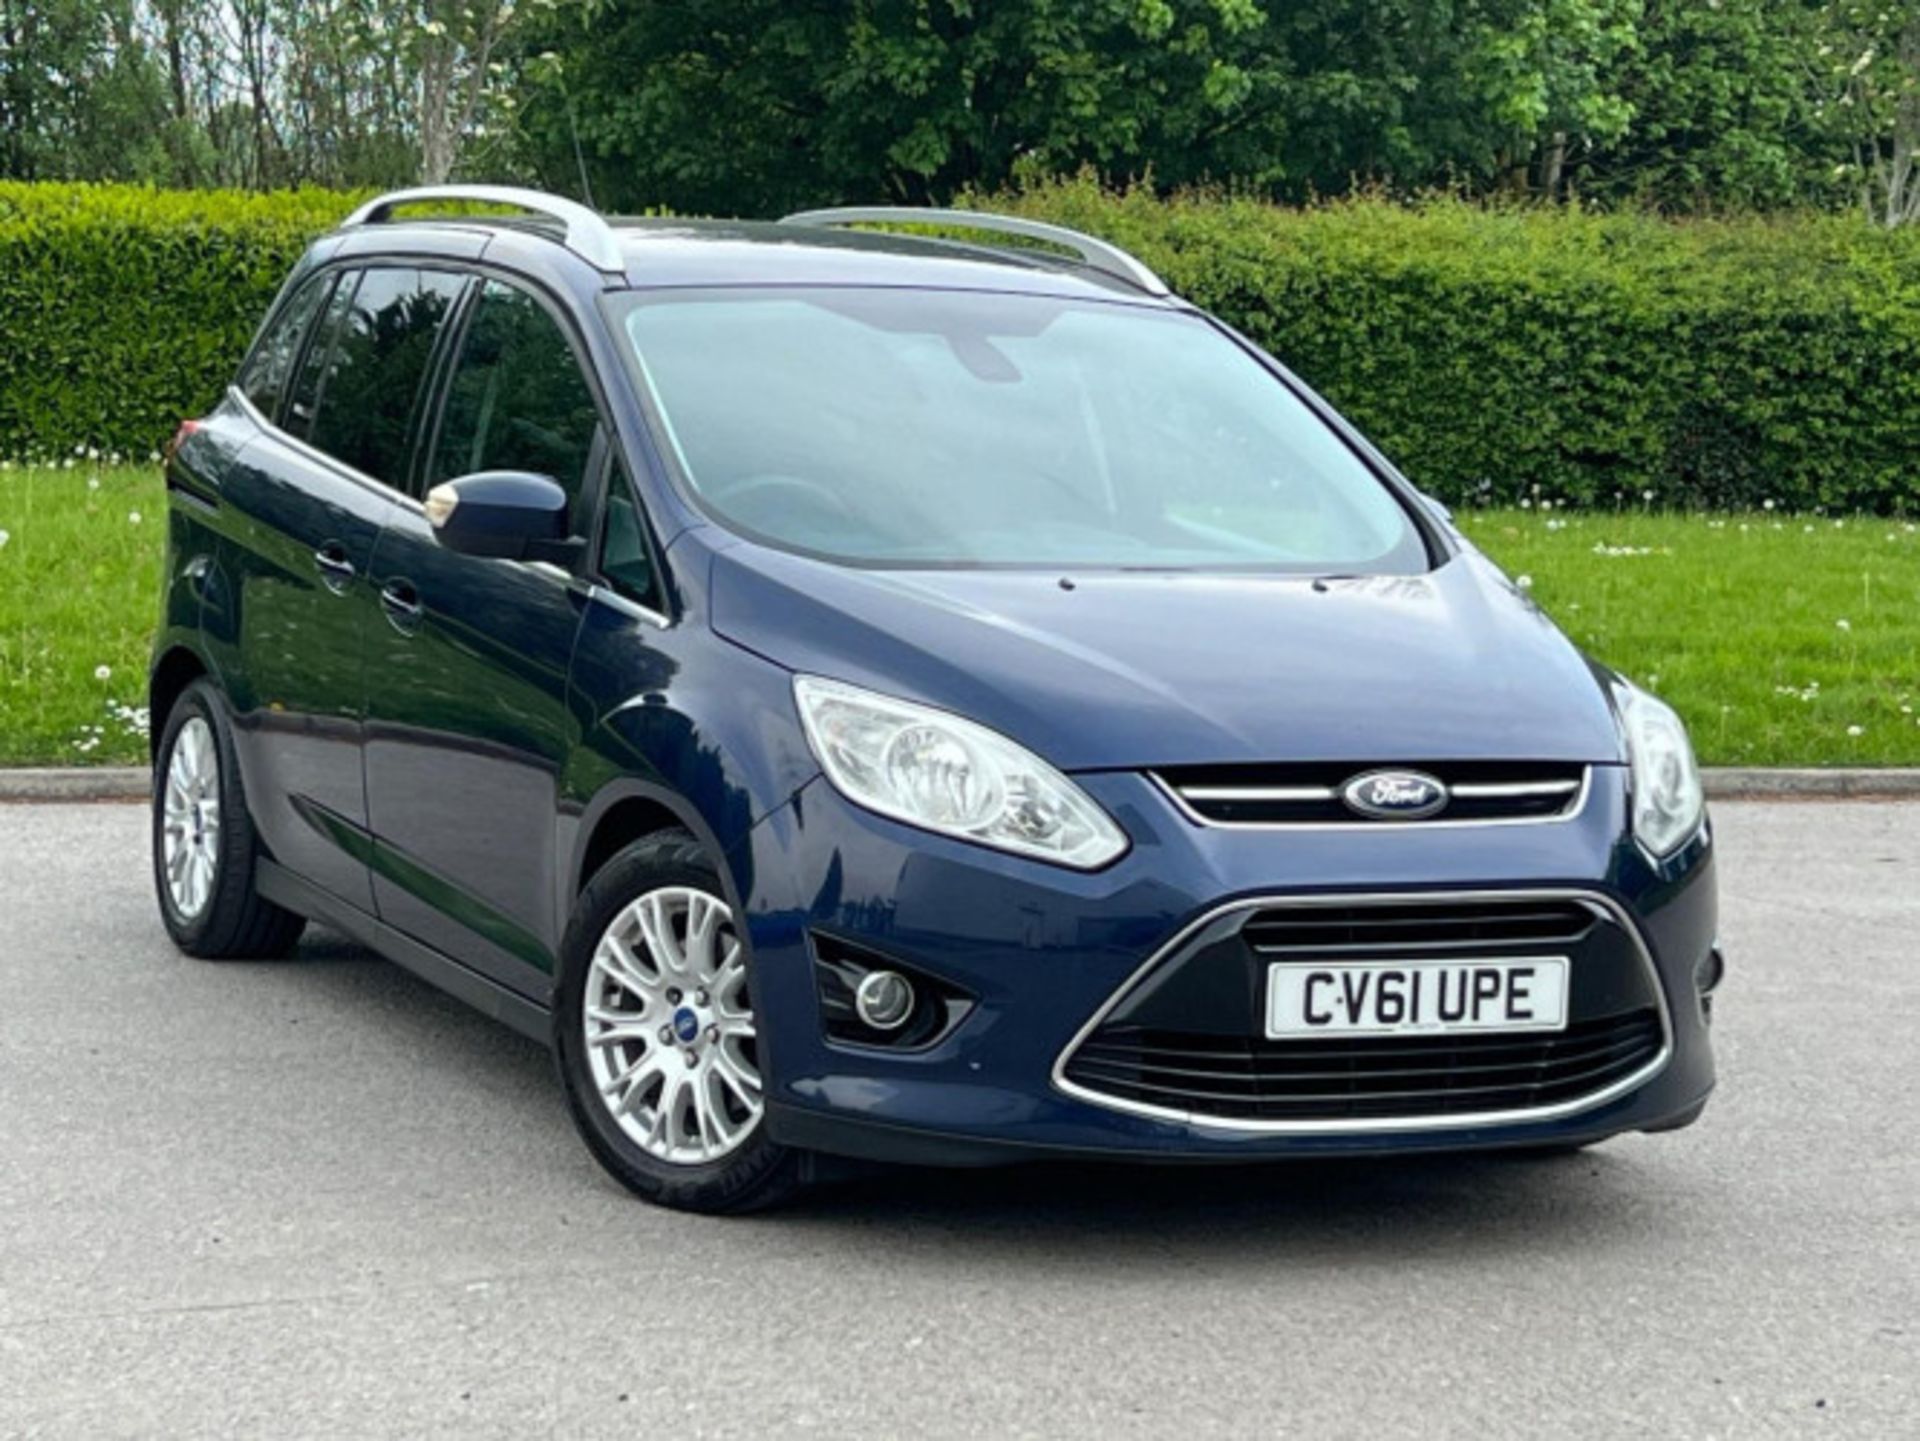 STYLISH AND SPACIOUS 2011 FORD GRAND C-MAX 1.6 TDCI >>--NO VAT ON HAMMER--<< - Image 5 of 136